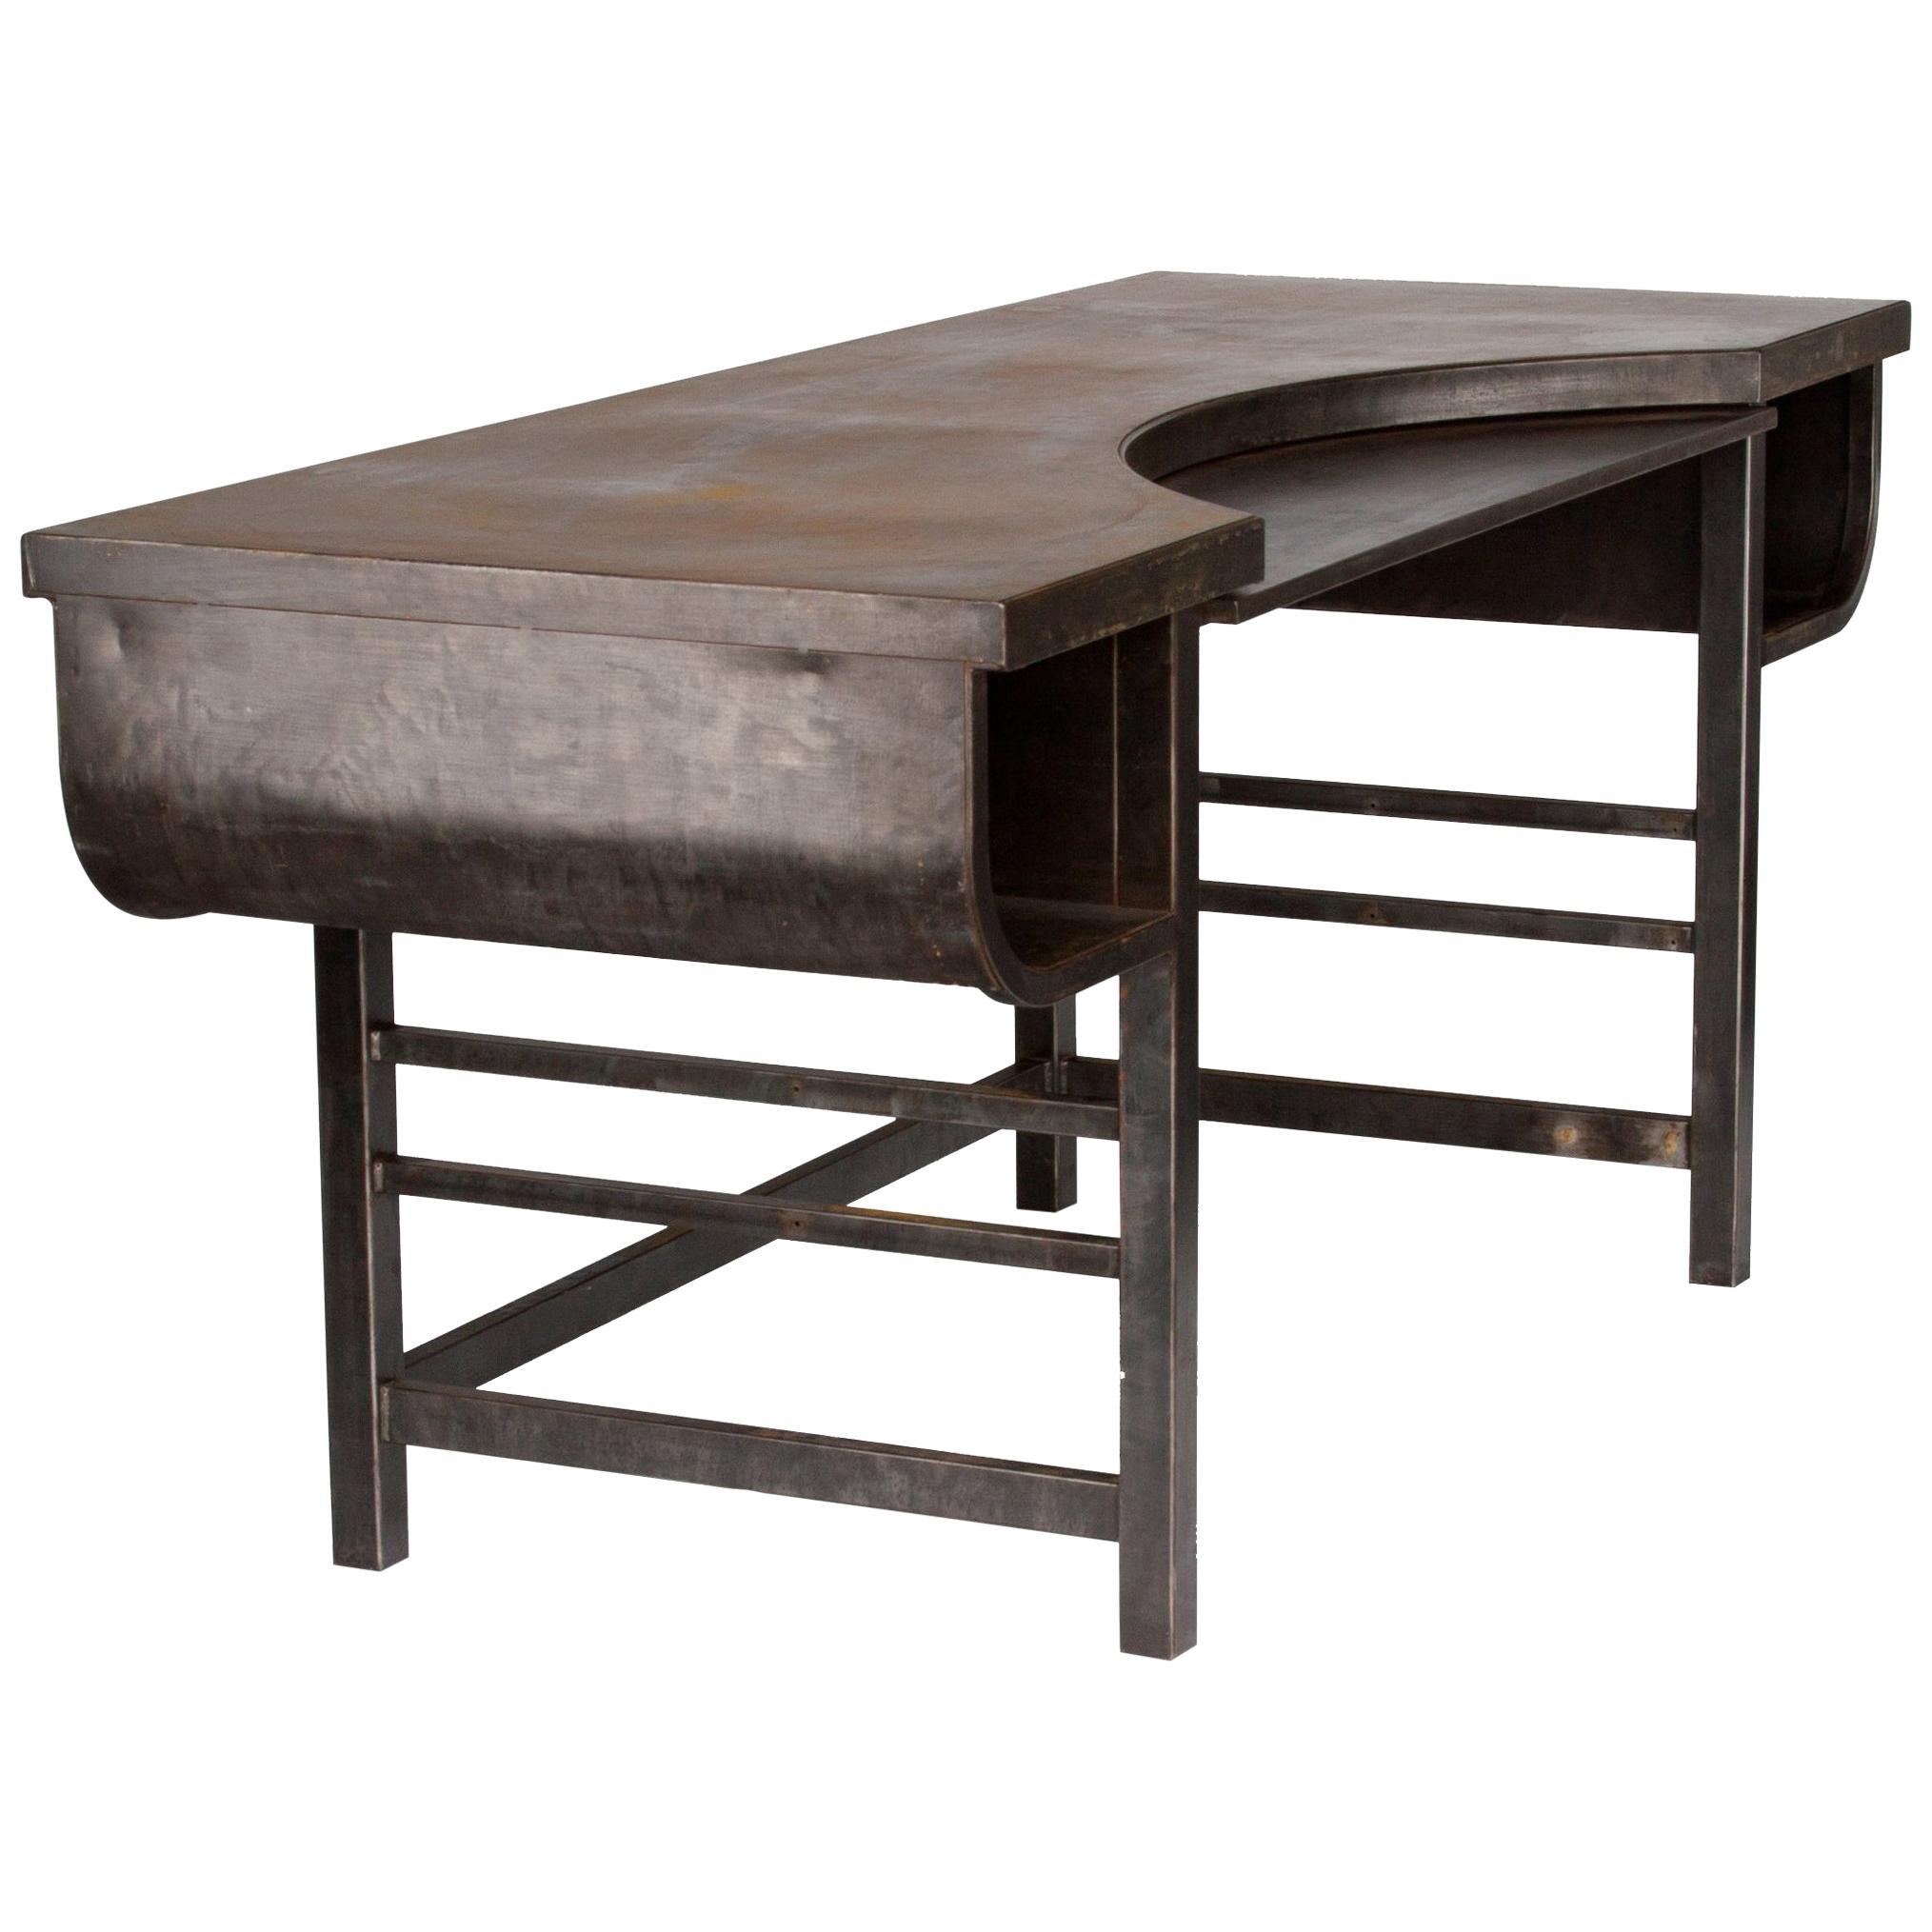 Early 20th Century French Industrial Metal Postmasters Desk